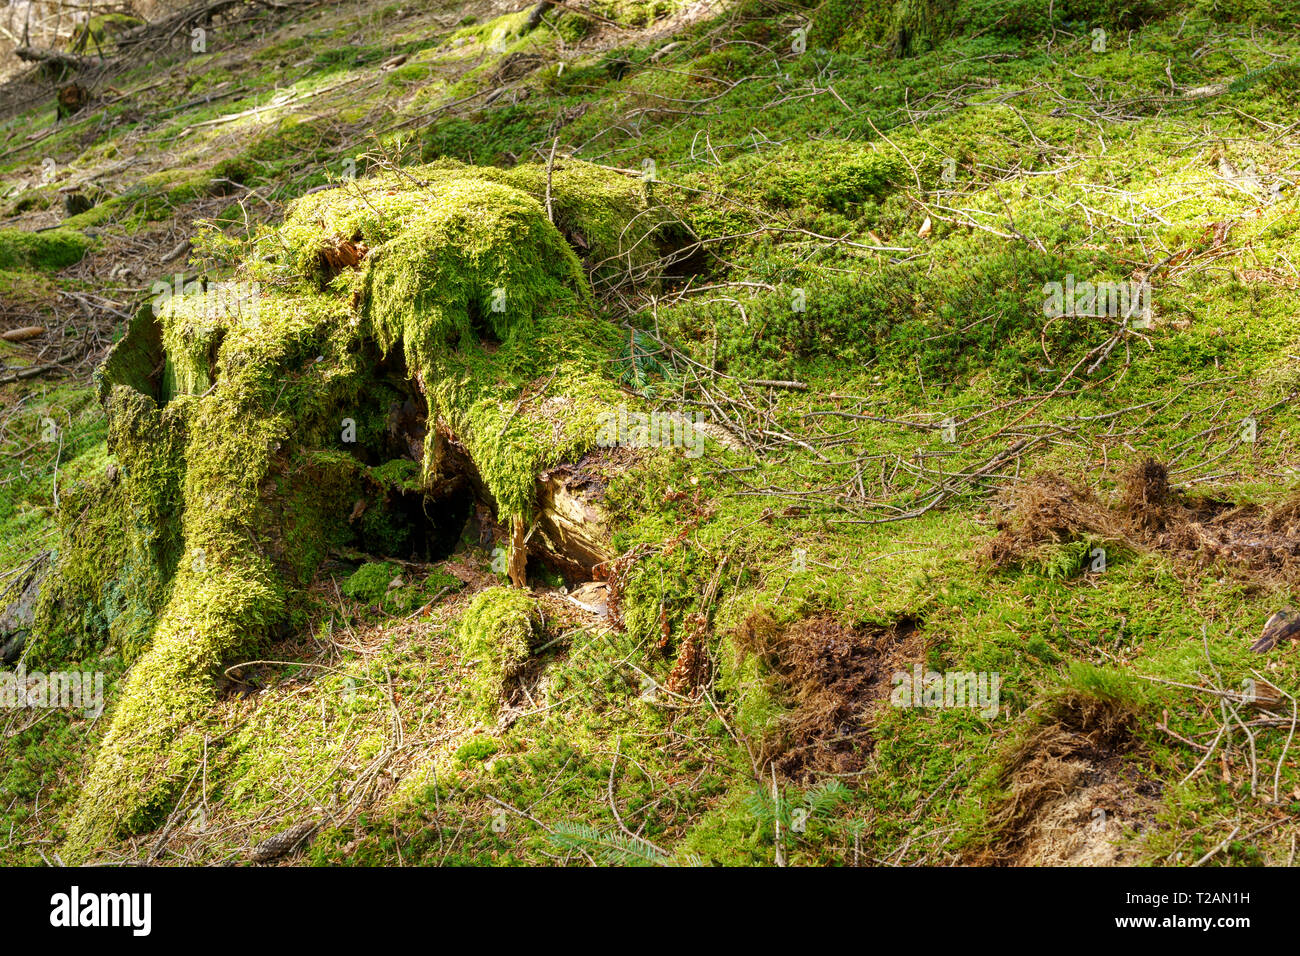 Mossy tree trunk with sunbeams on mossy ground in Bestwig, Sauerland, Germany Stock Photo